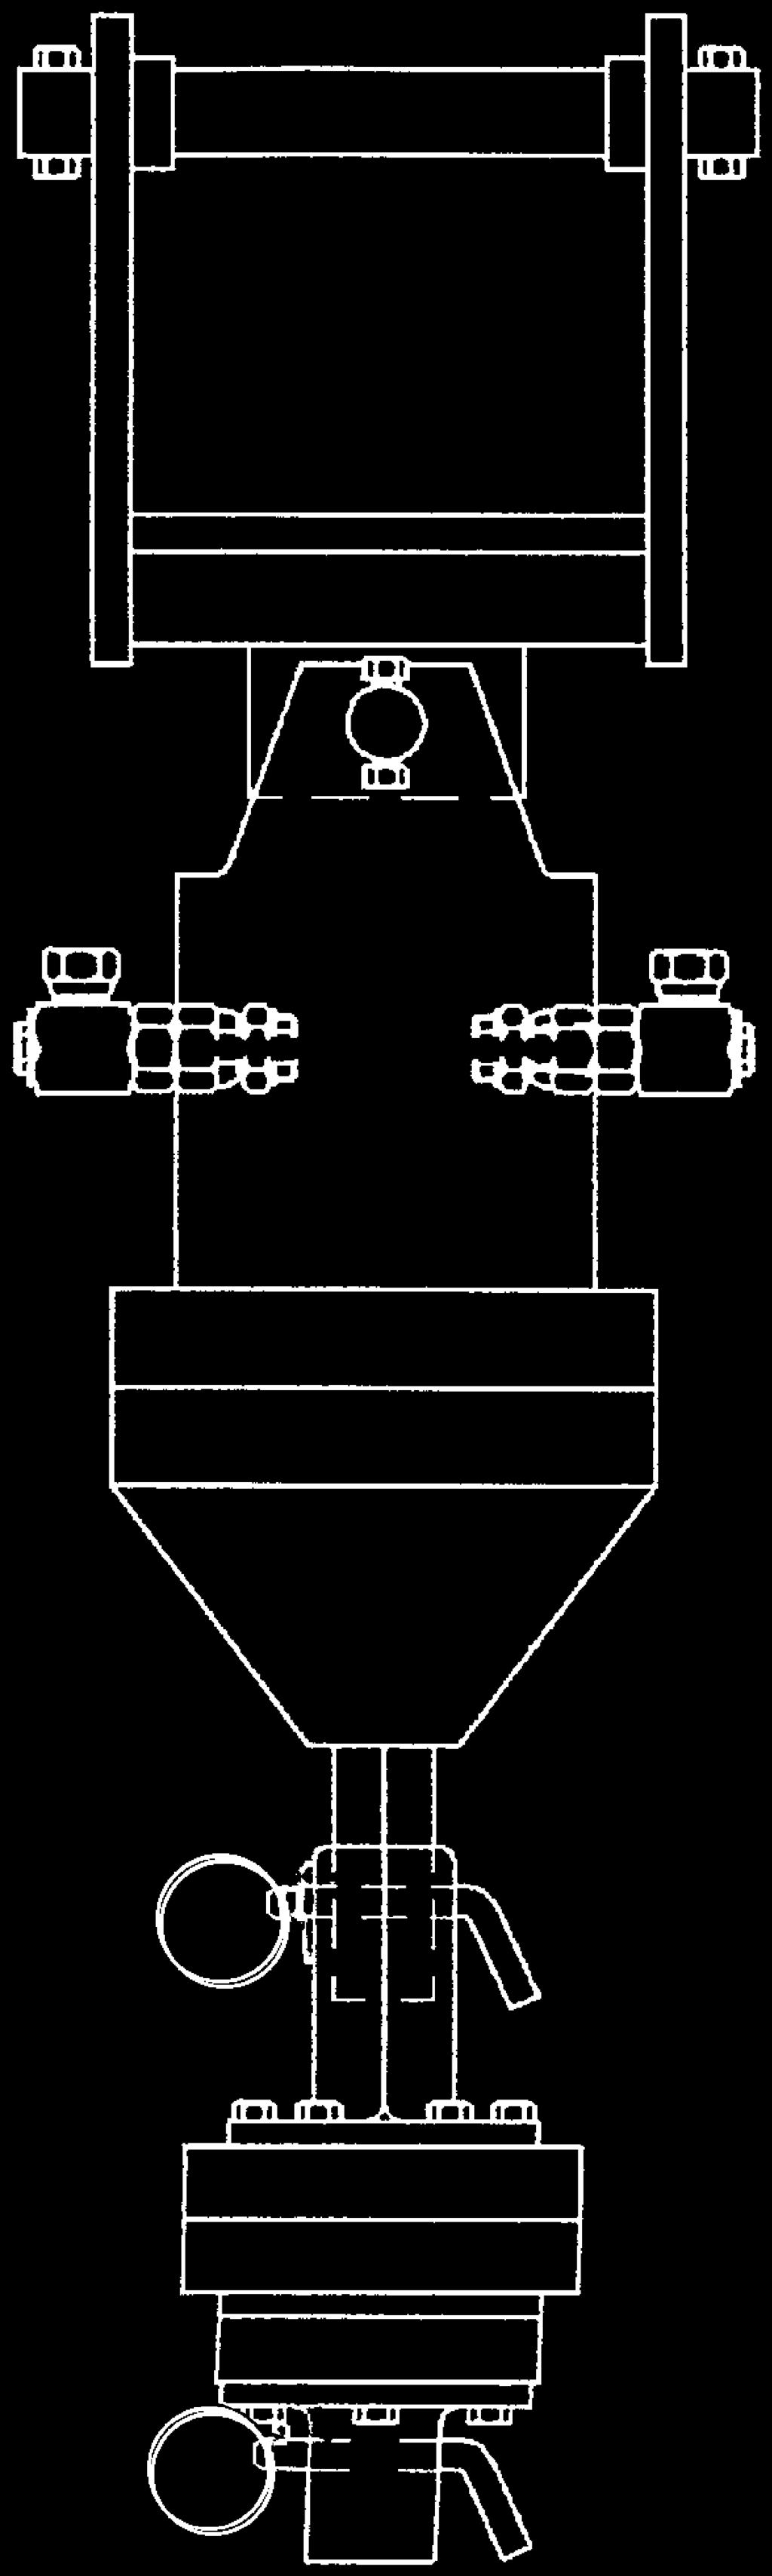 Typical Backhoe Tool-Strings For SS5 and SS150 (1 1 2" Square Shaft) Series Anchors Backhoe Mounting Bracket For SS175 (1 3 4" Square Shaft) Series Anchors Backhoe Mounting Bracket Headroom Dimension